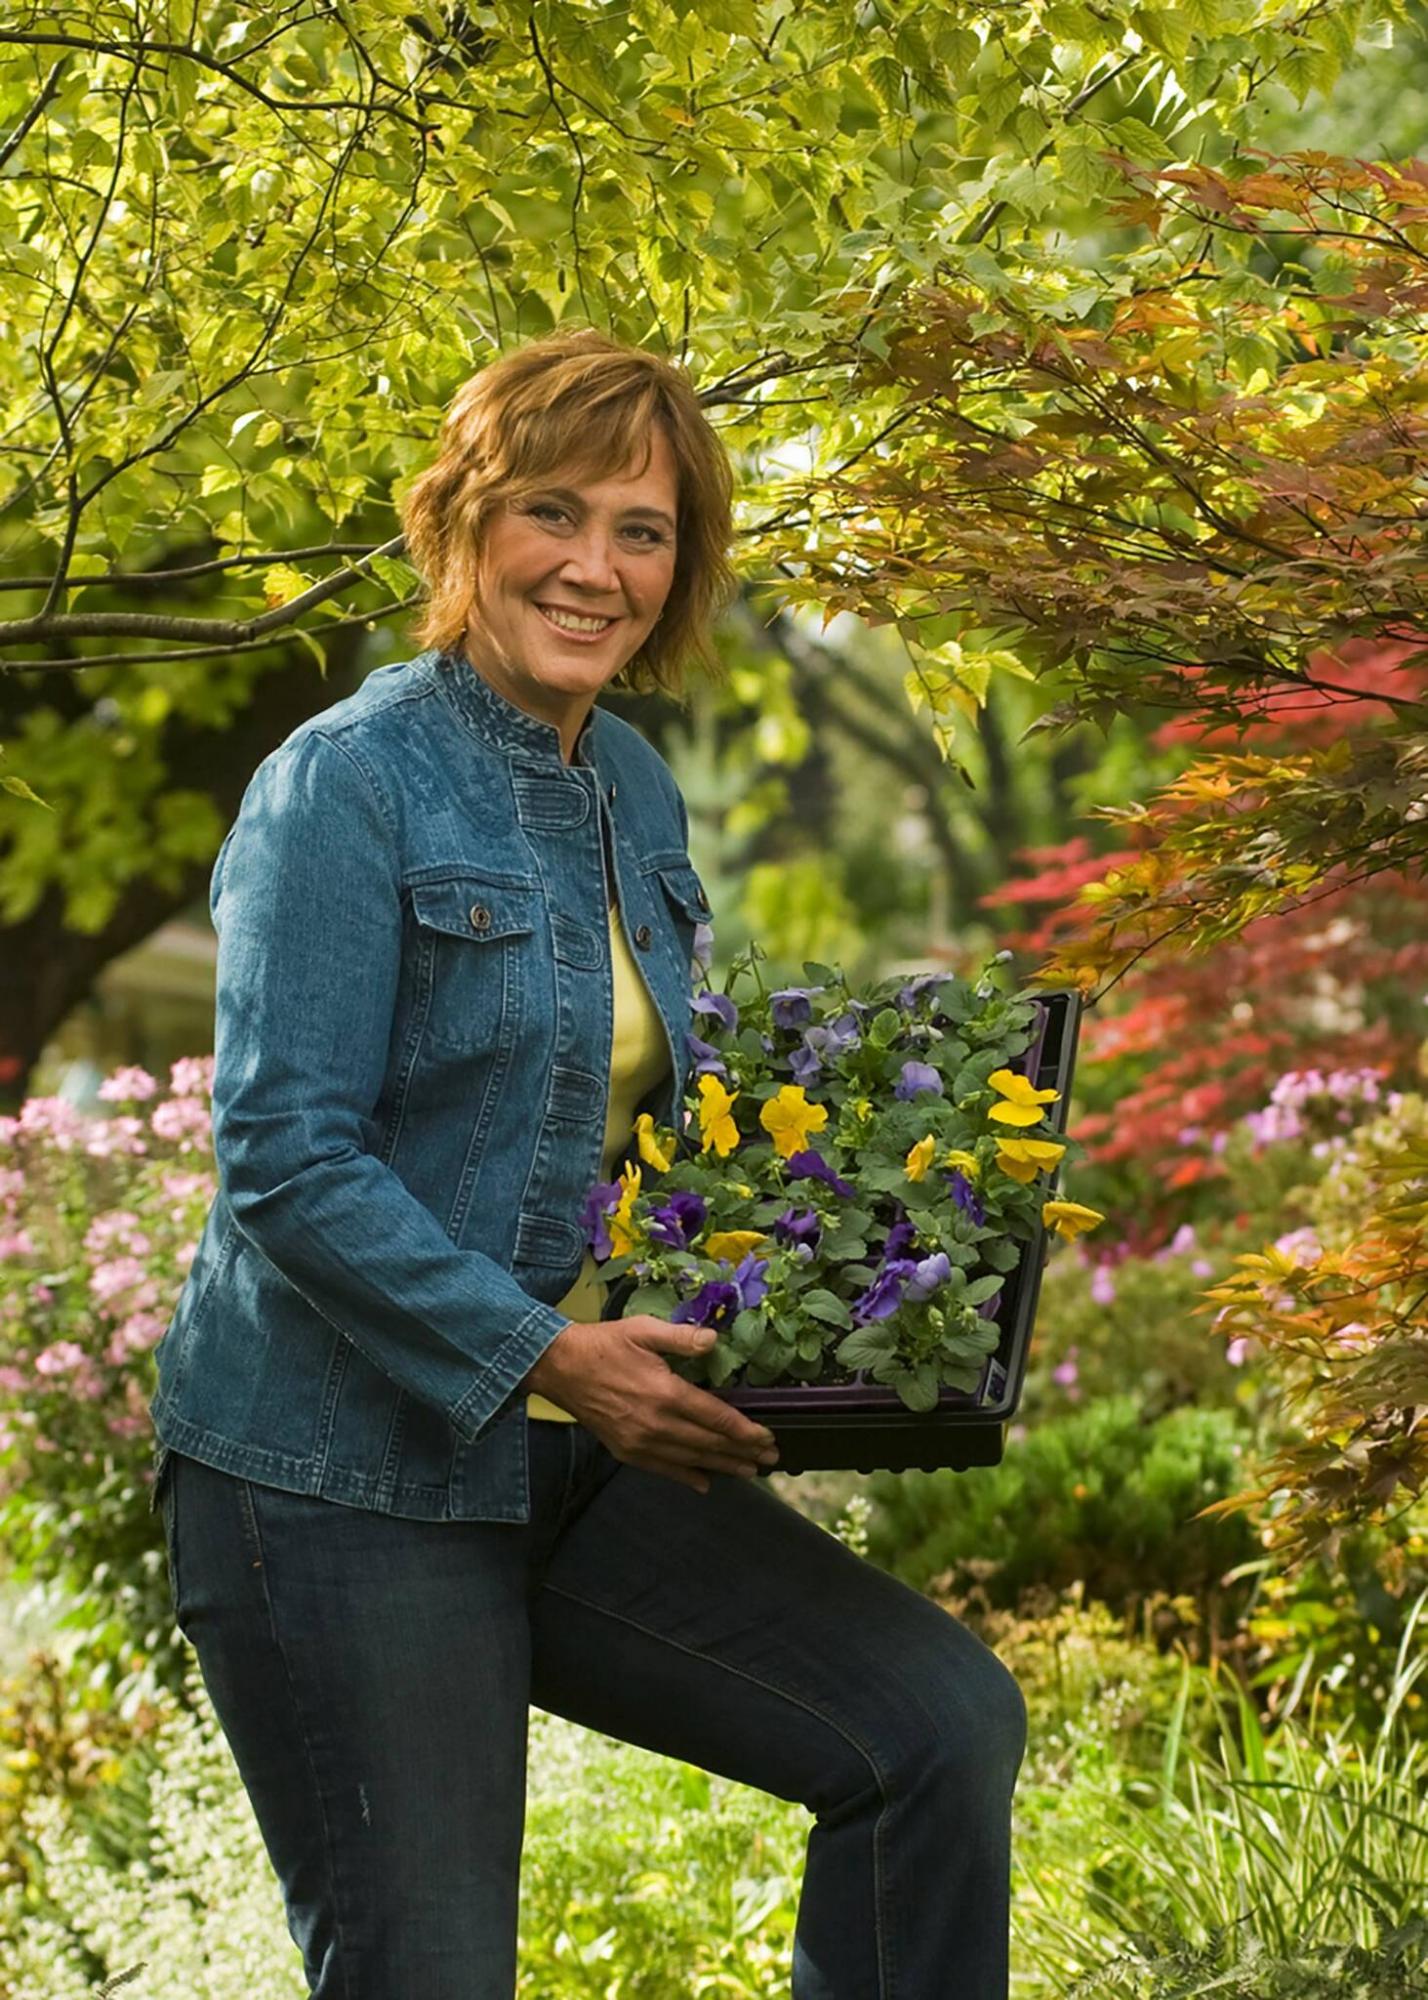 <p>Photos supplied by Melinda Myers</p><p>Gardening expert Melinda Myers is the keynote speaker at Gardening Saturday in Grand Forks on April 9.</p>